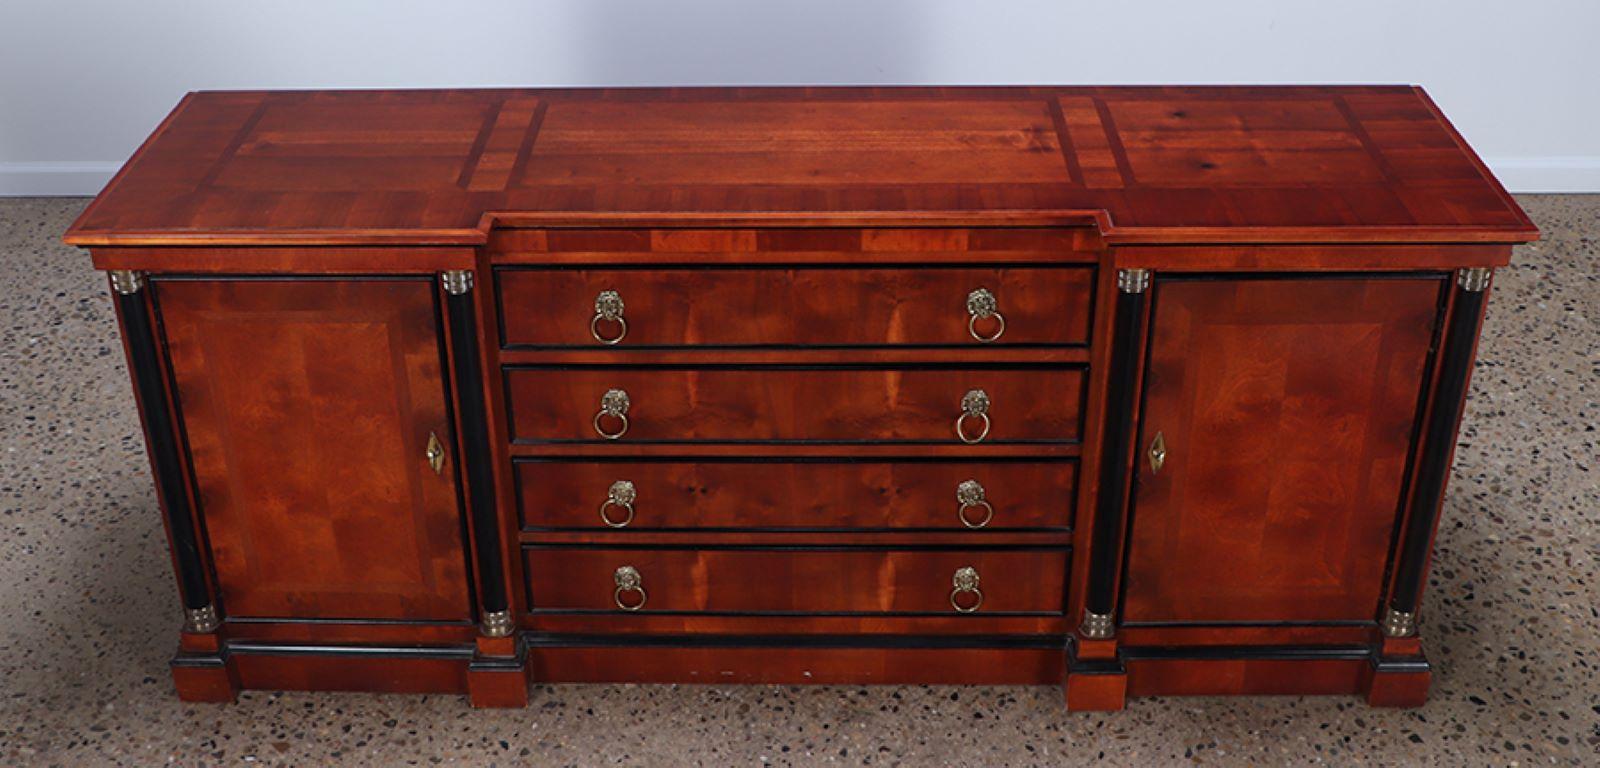 A Yew wood Empire style sideboard or credenza by Century. The case has ebonized columns flanking the doors and lion head brass drawer pulls.